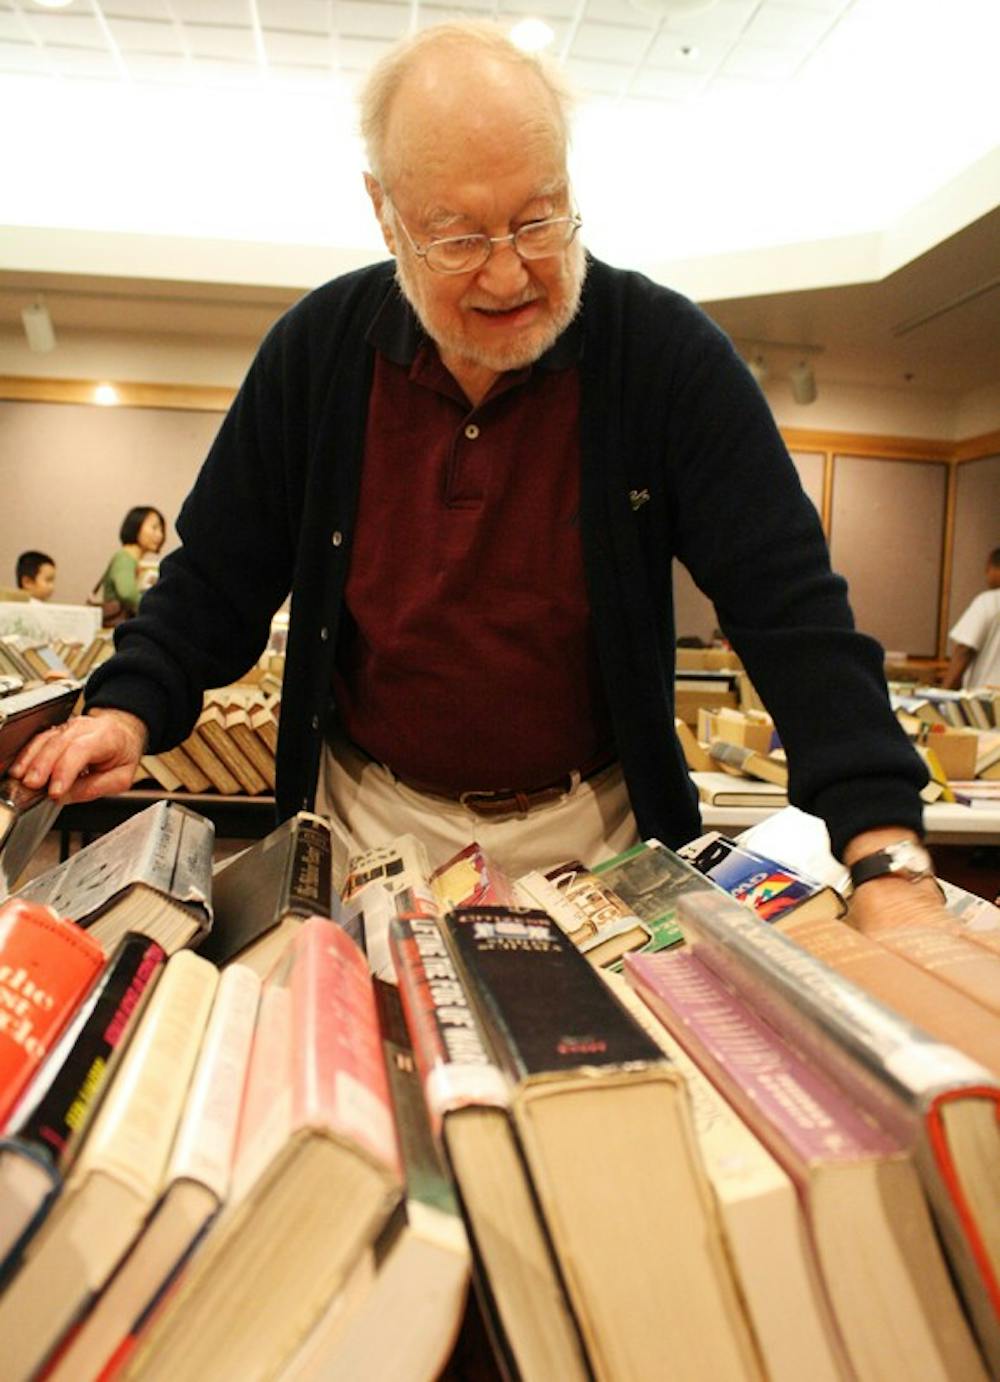 Former Wilson Library librarian and UNC faculty member Ray Carpenter of Chapel Hill organizes books at the sale on Sunday.